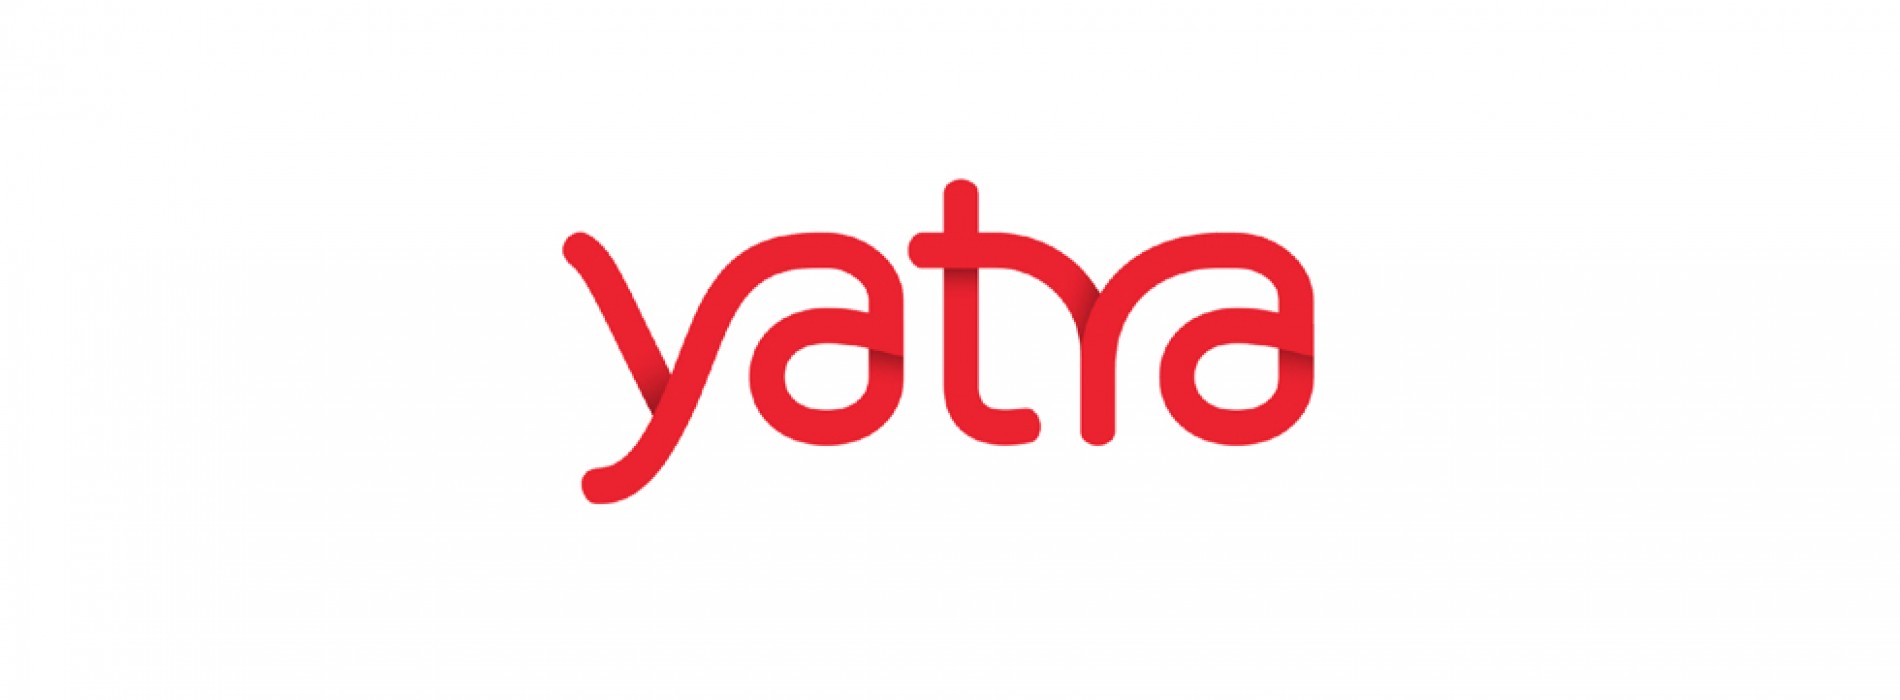 Yatra.com, “India’s most trusted online travel brand” partners with PeopleStrong